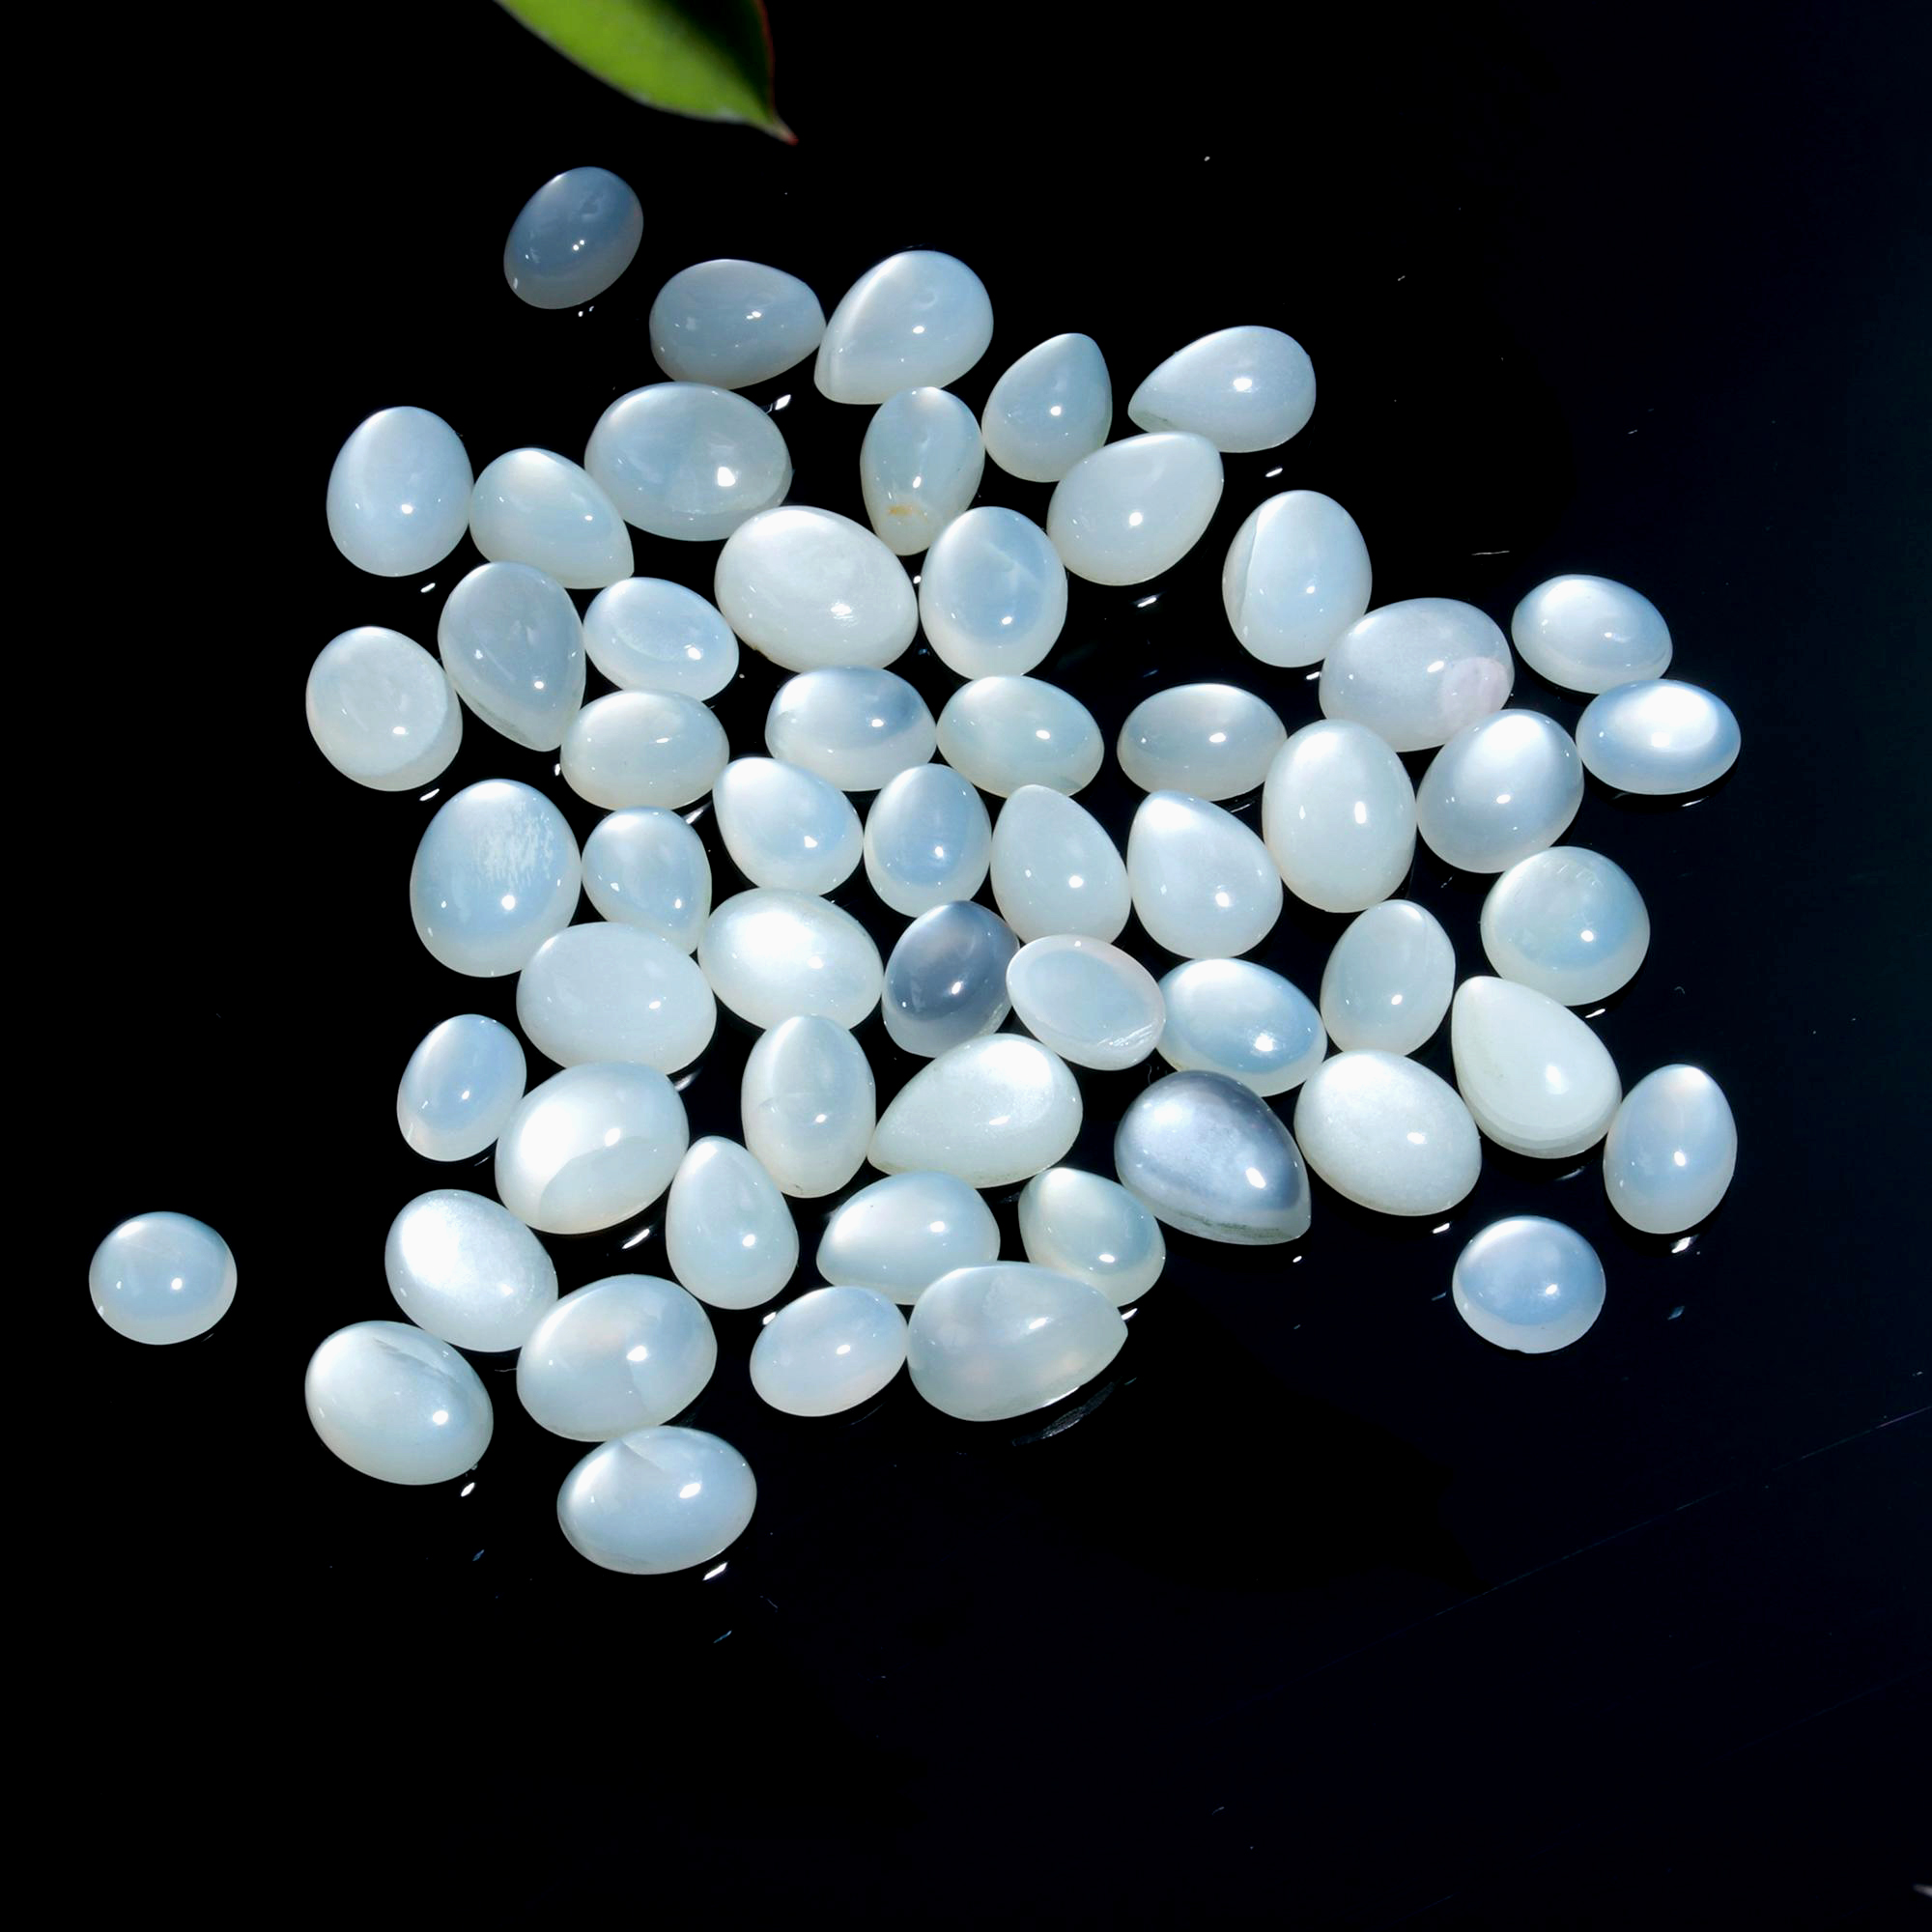 57 Pcs. 64Cts. Natural Grey Rainbow Moonstone polished Mix Cabochon Wholesale Loose Lot Size 9x7 6x6mm Gemstone for jewelry